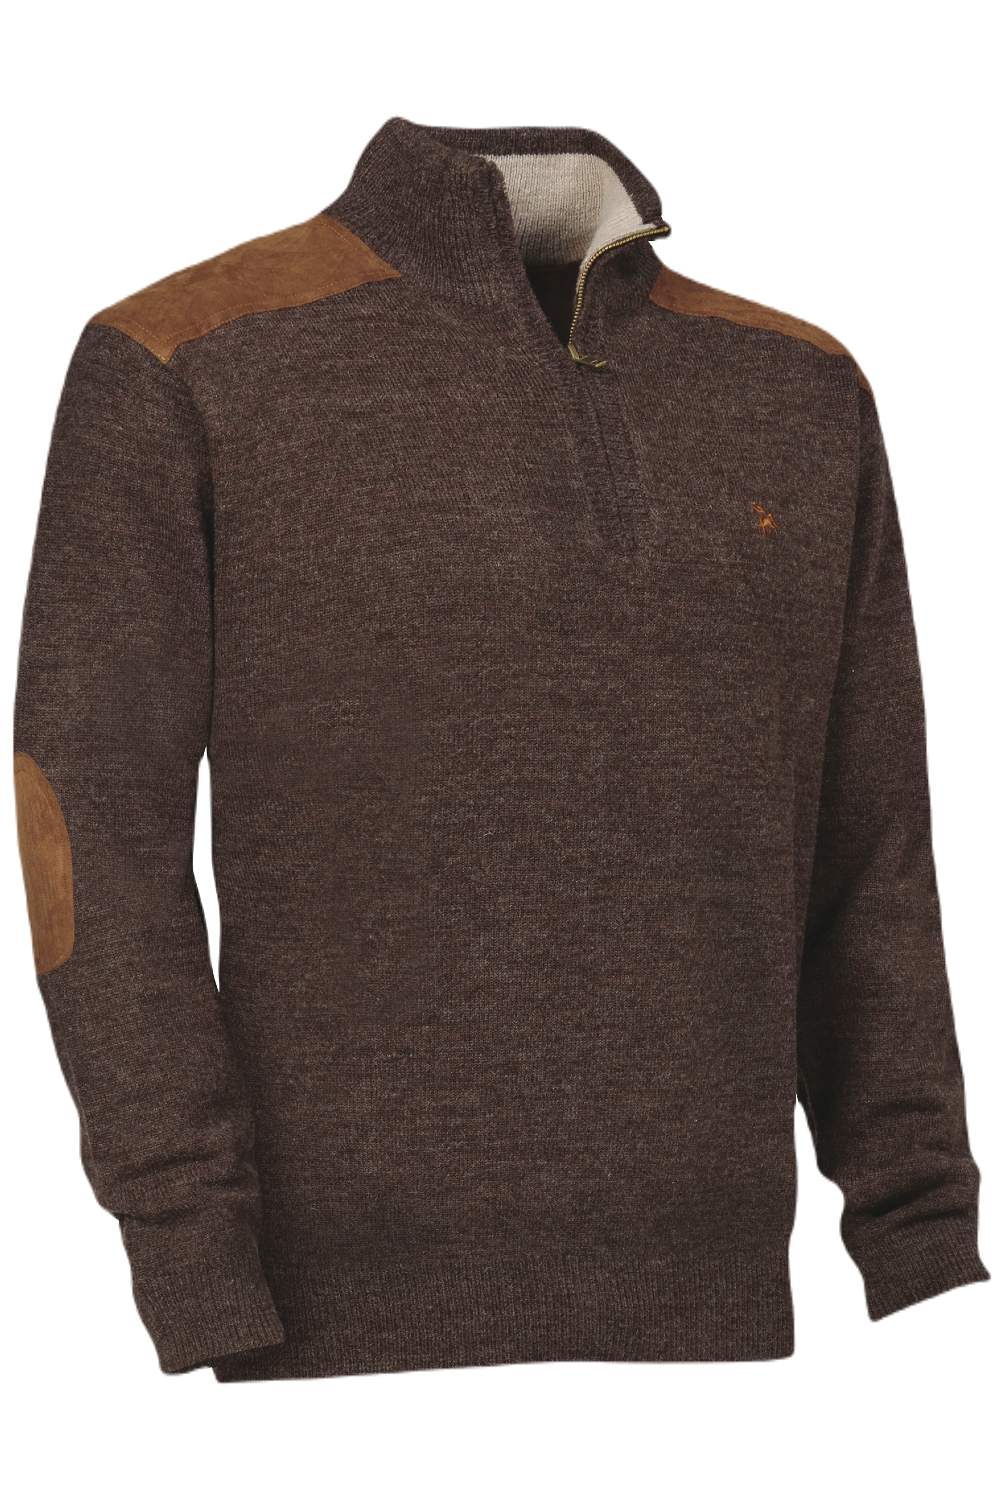 Verney Carron Zipped Fox Sweater in Brown 